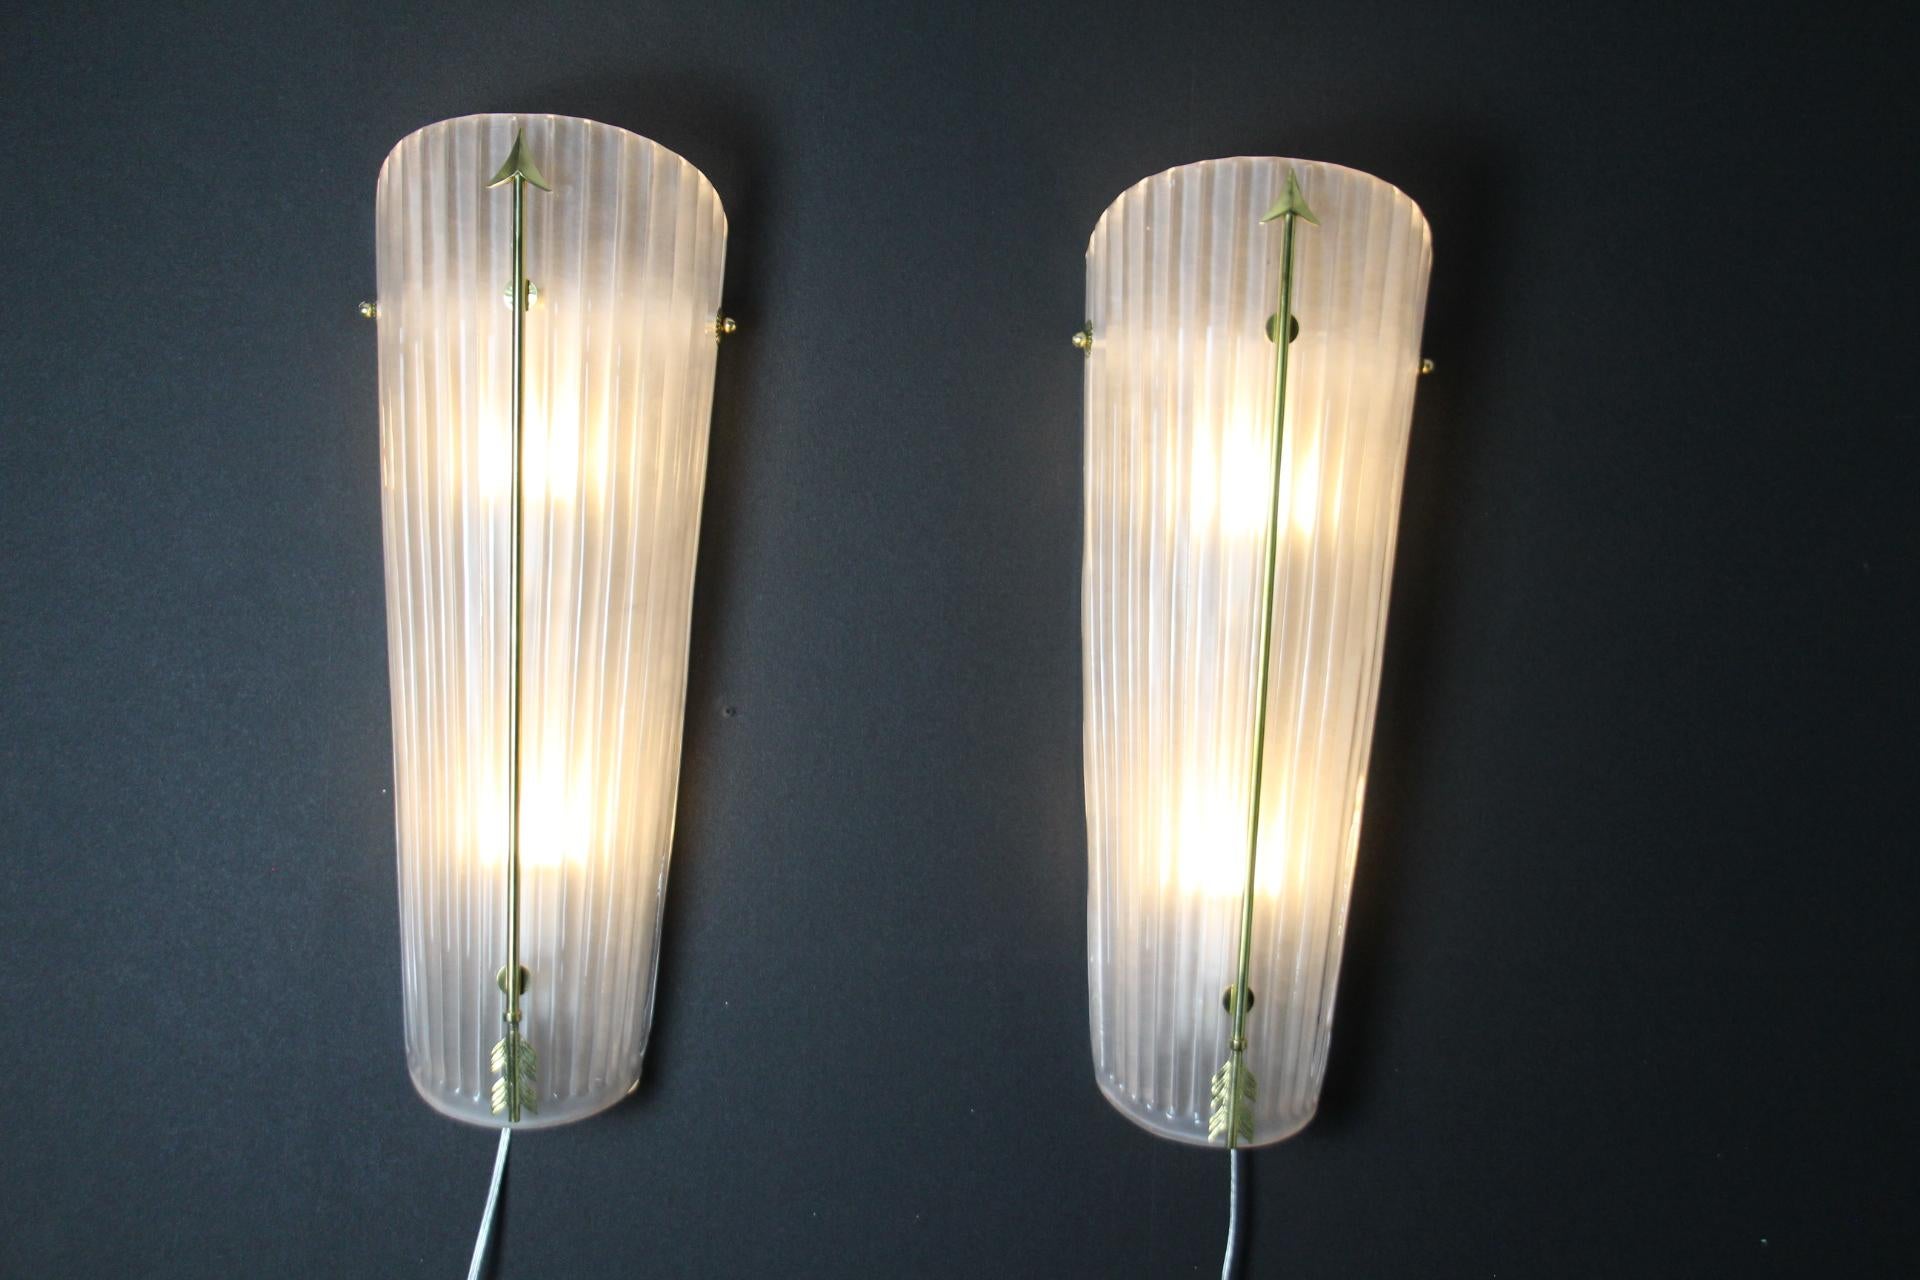 Tall Mid-Century Pair of Sconces in White Glass , Petitot Style Wall Lights For Sale 3